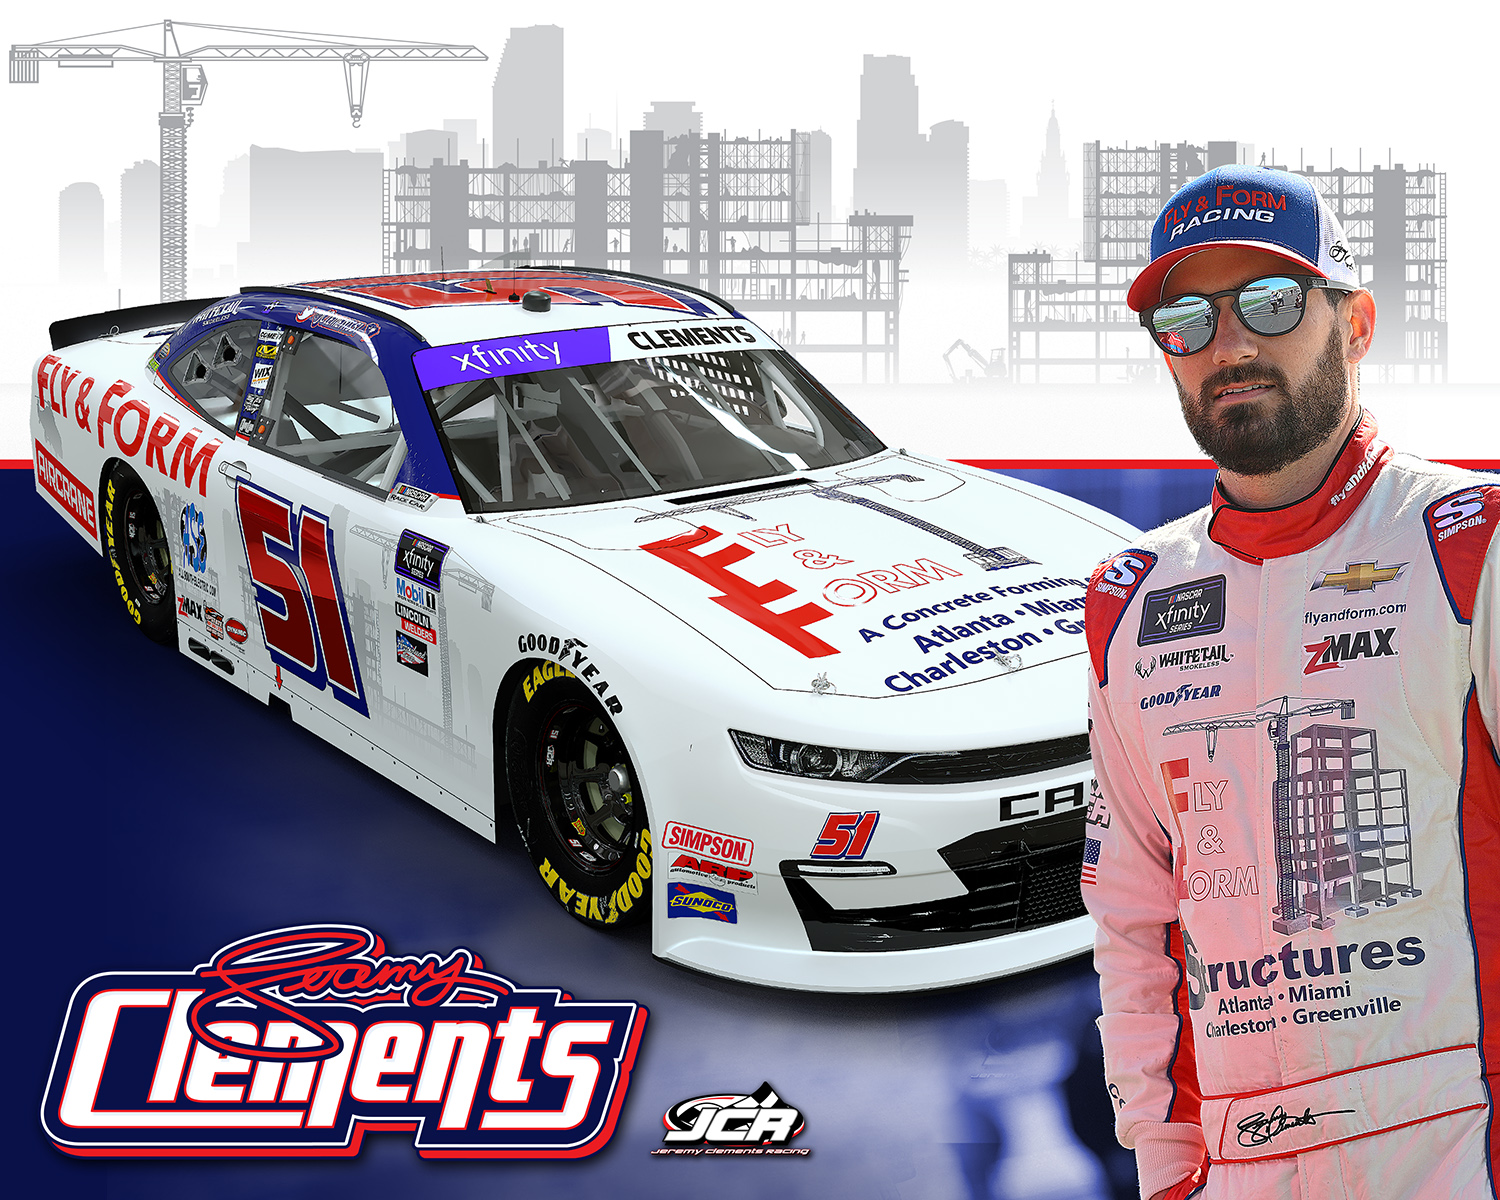 Fly & Form Concrete Structures Inc. back with JCR for Homestead